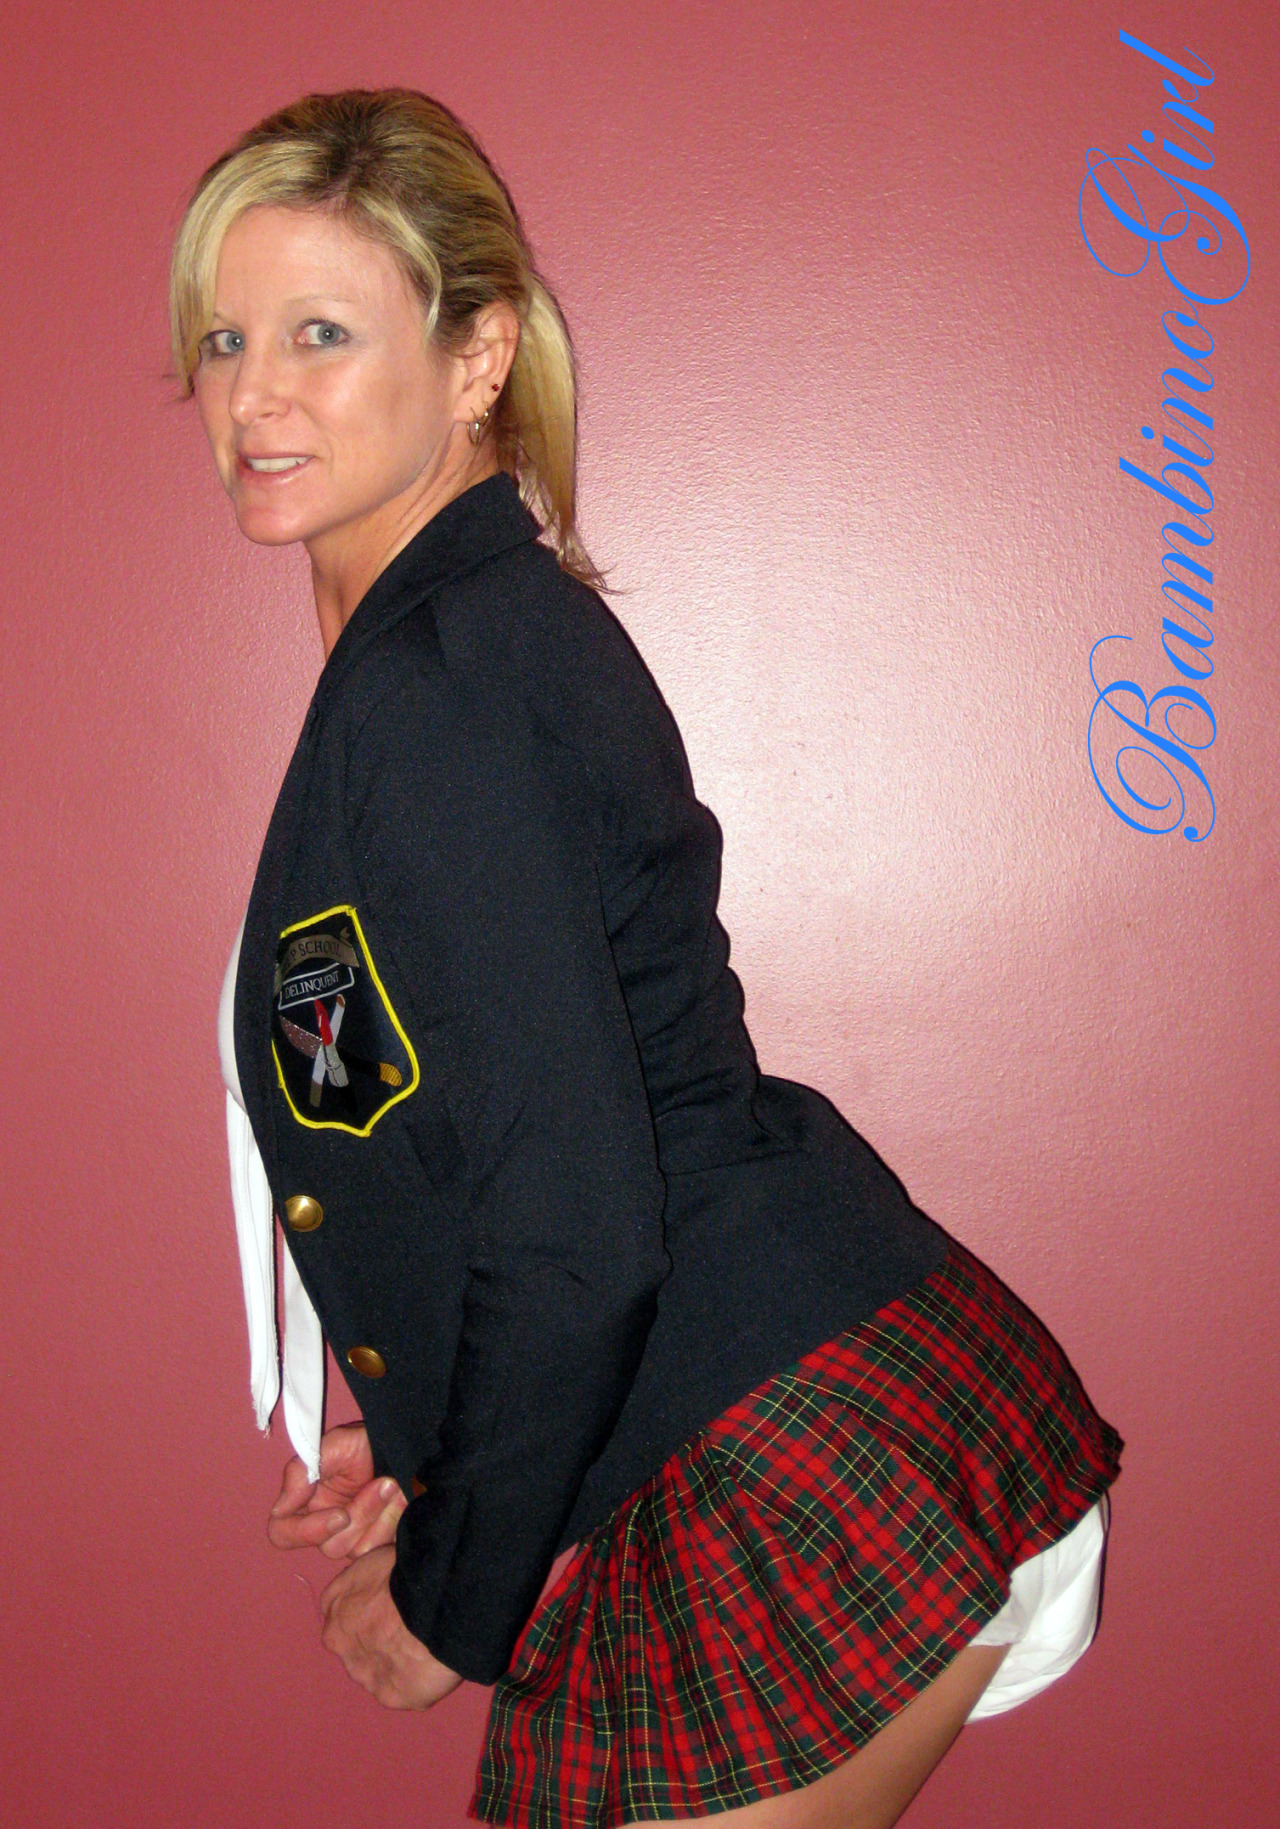 bambinogirls-blog:  Daddy says all girls should have to wear this uniform with their